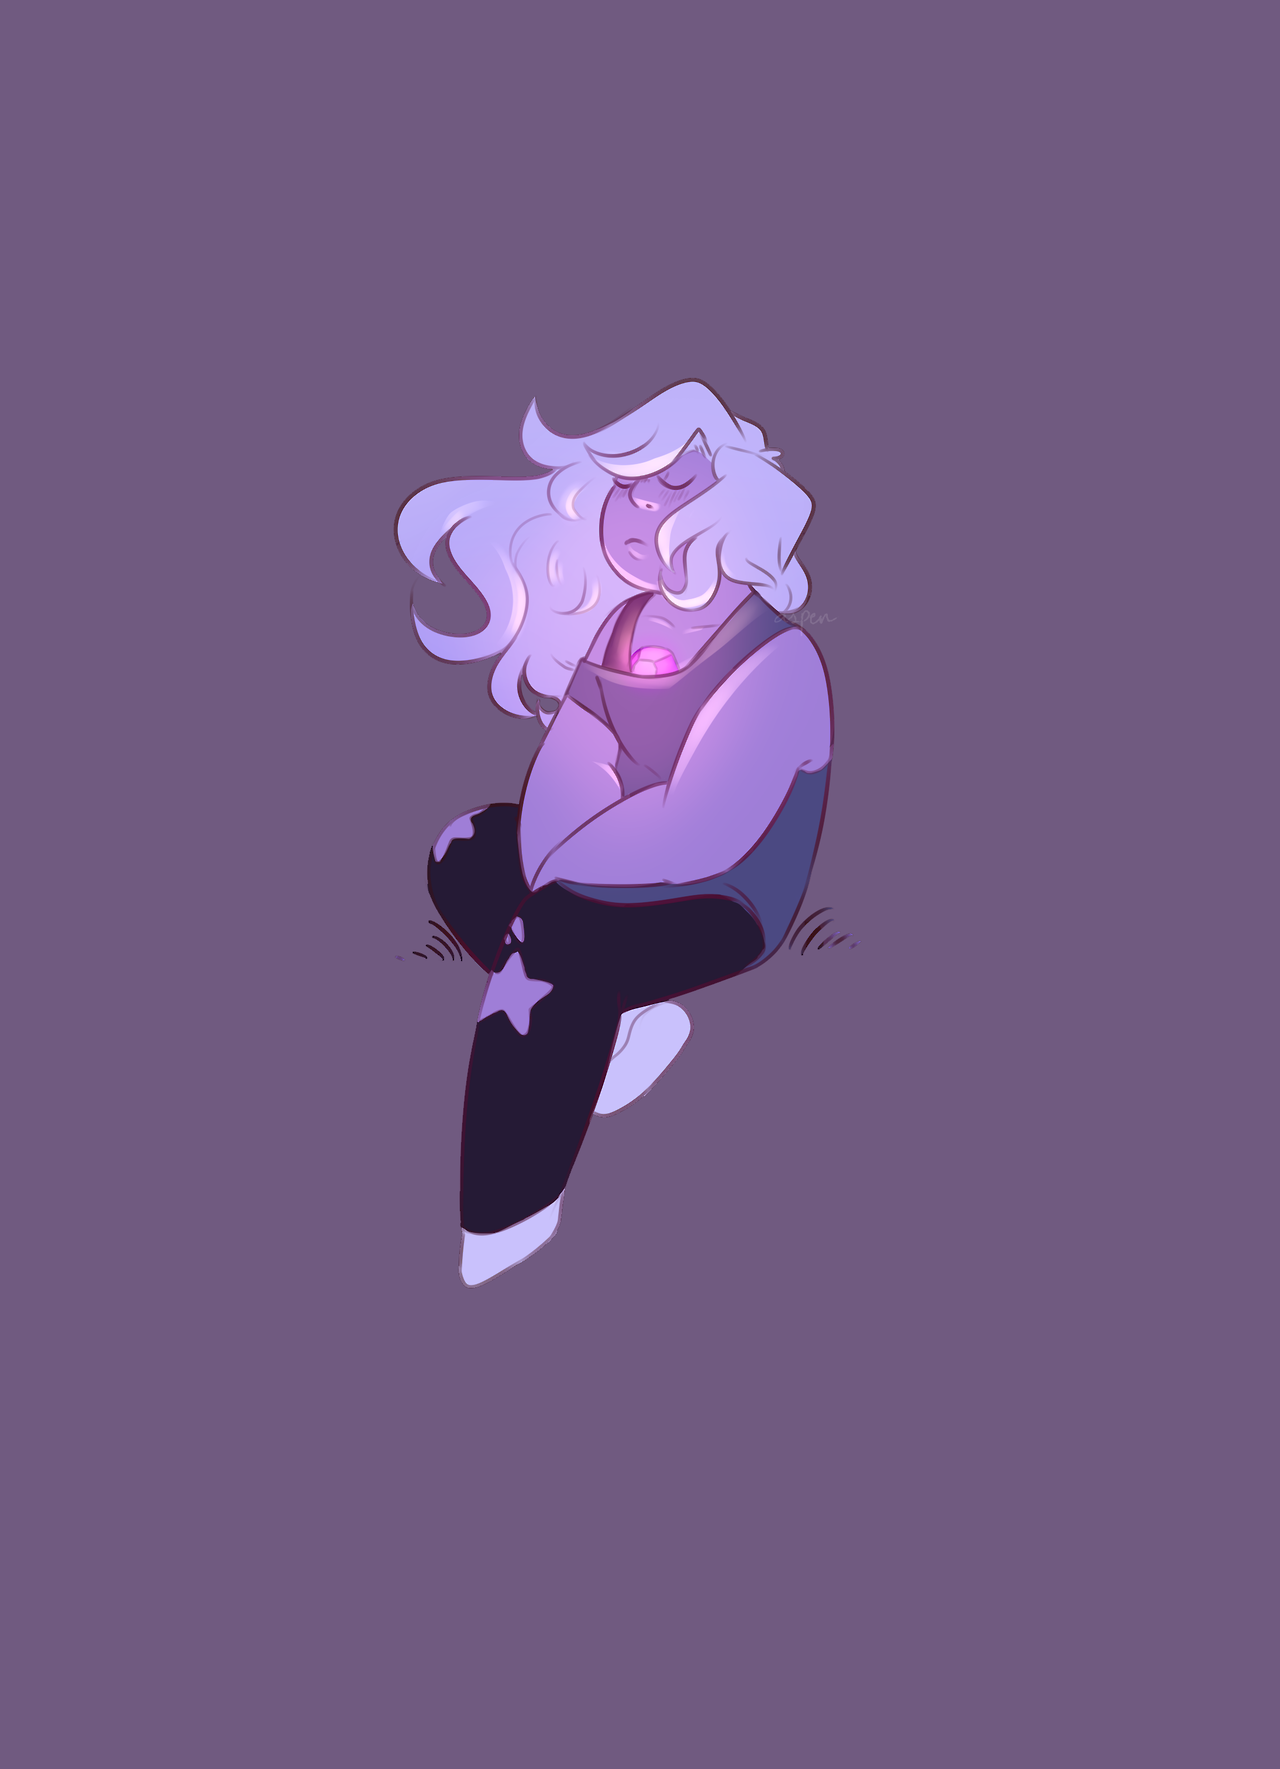 its been a year since ive watched this show, but i always loved amethyst speedpaint